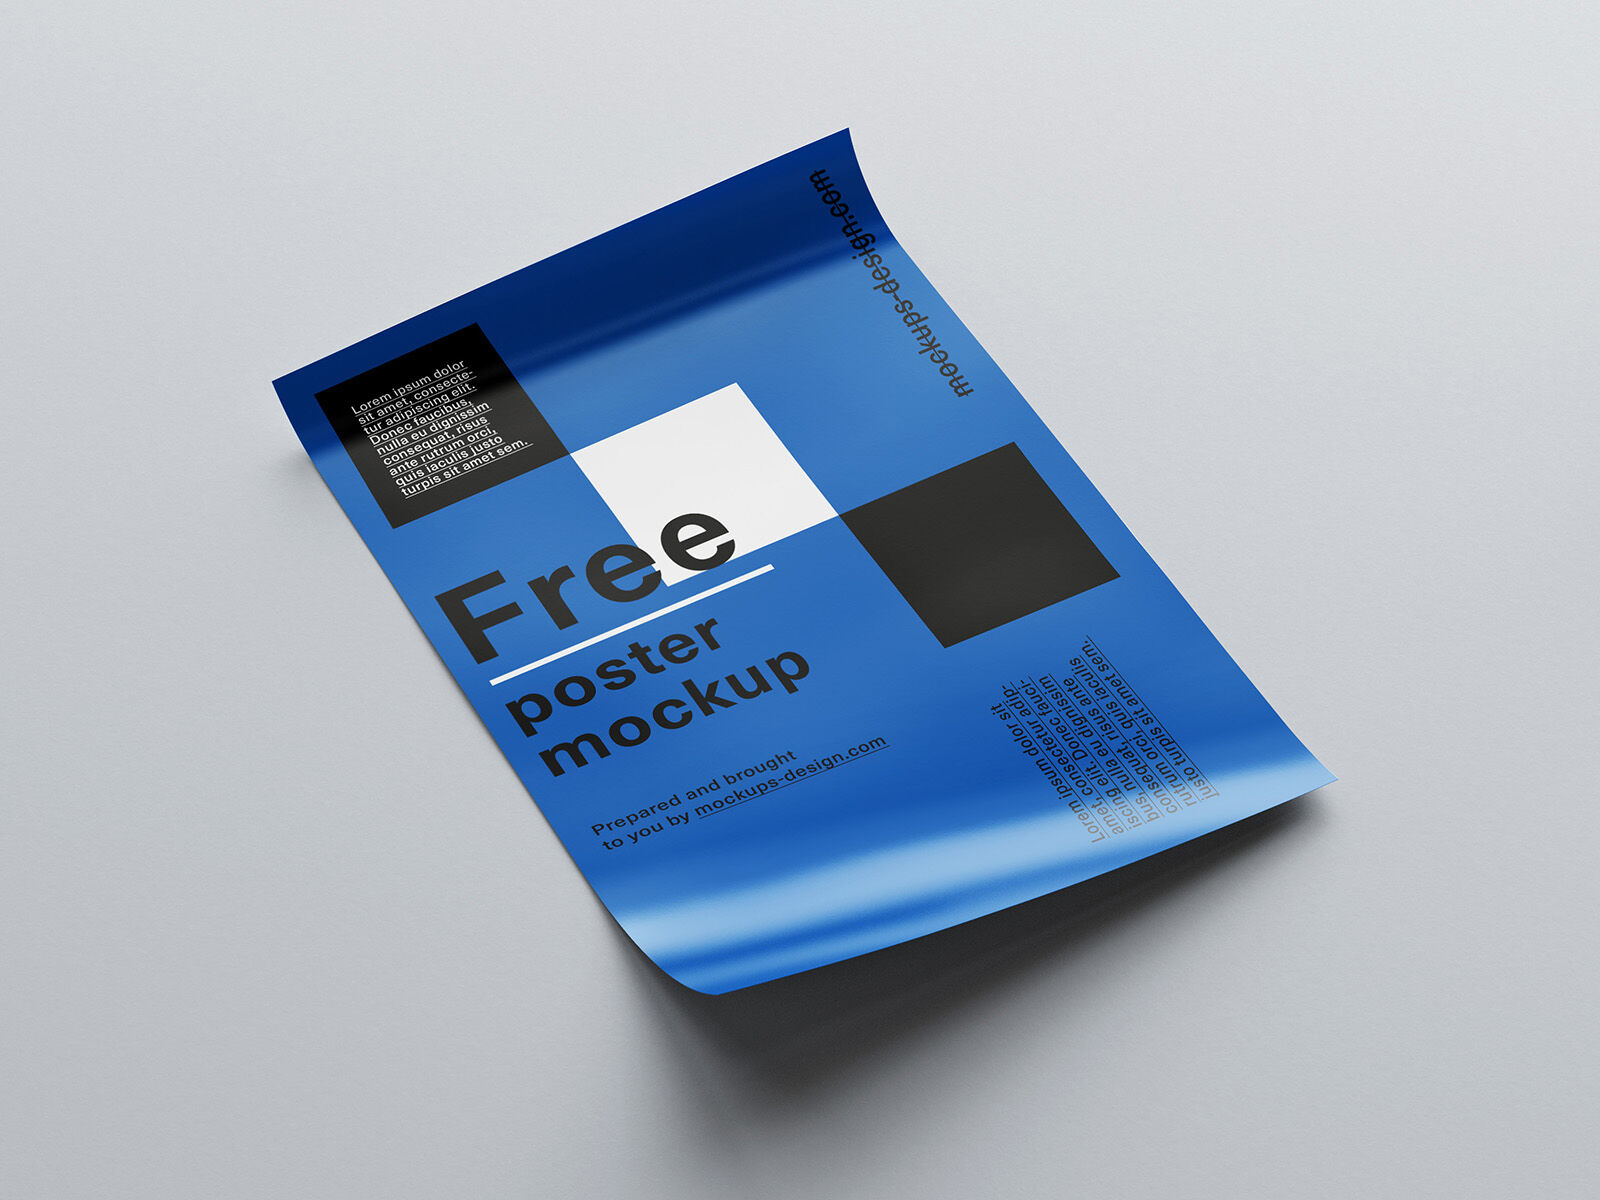 11 Mockups of Coated Posters in Different Views FREE PSD